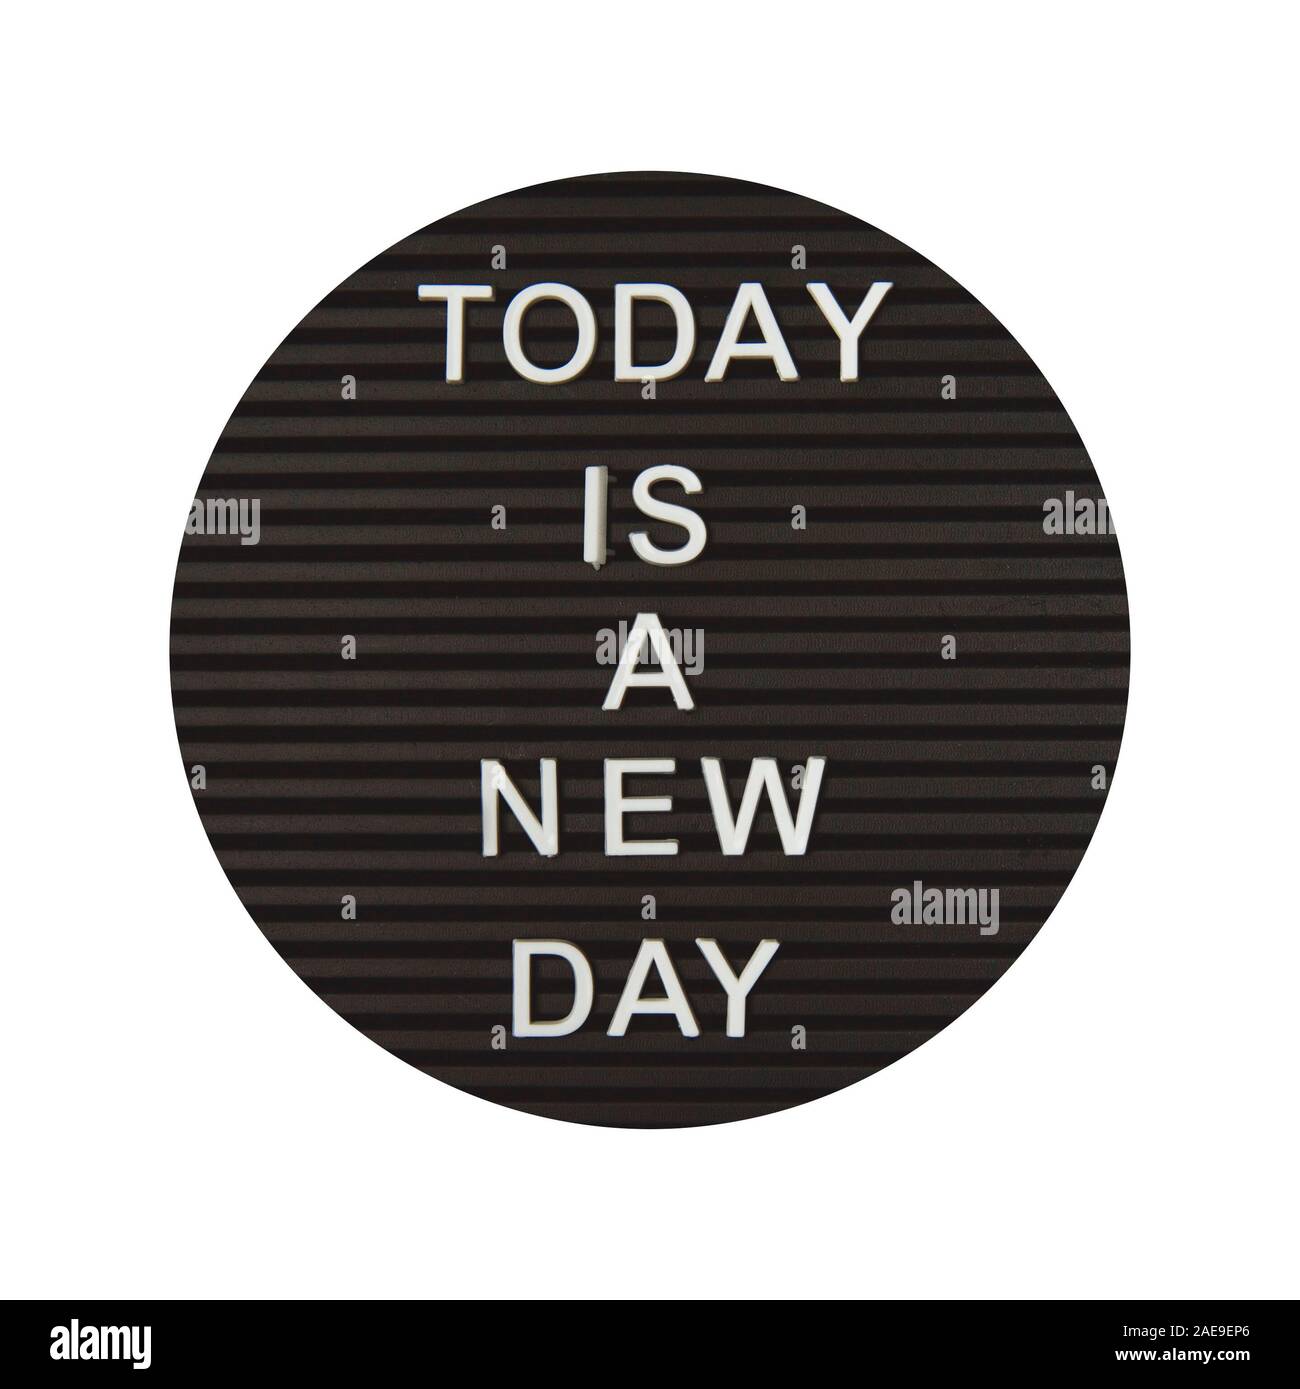 Today is a new day - text on letter board Stock Photo